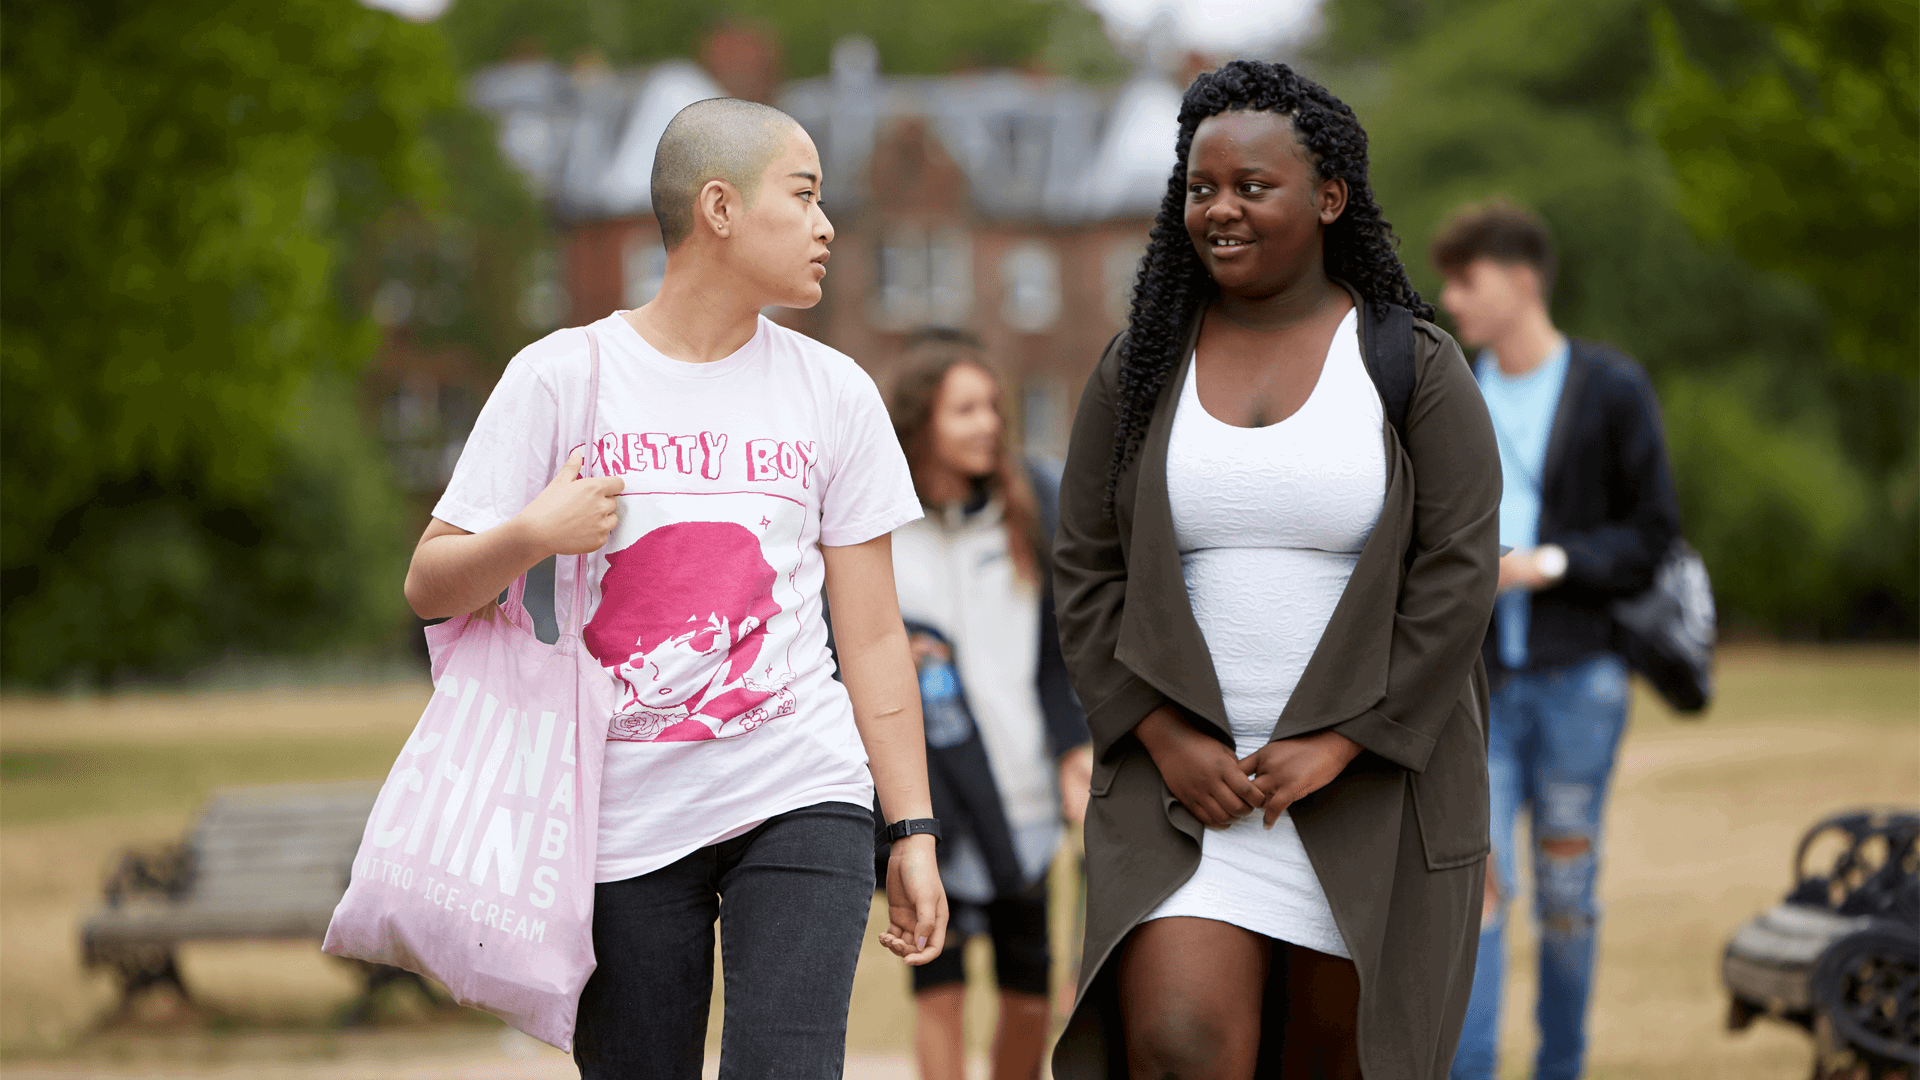 a-young-woman-with-shaved-hair-wearing-white-shirt-and-carrying-a-tote-bag-talking-to-another-young-woman-with-long-curly-hair-as-they-walk-in-a-park-with-young-people-on-their-background